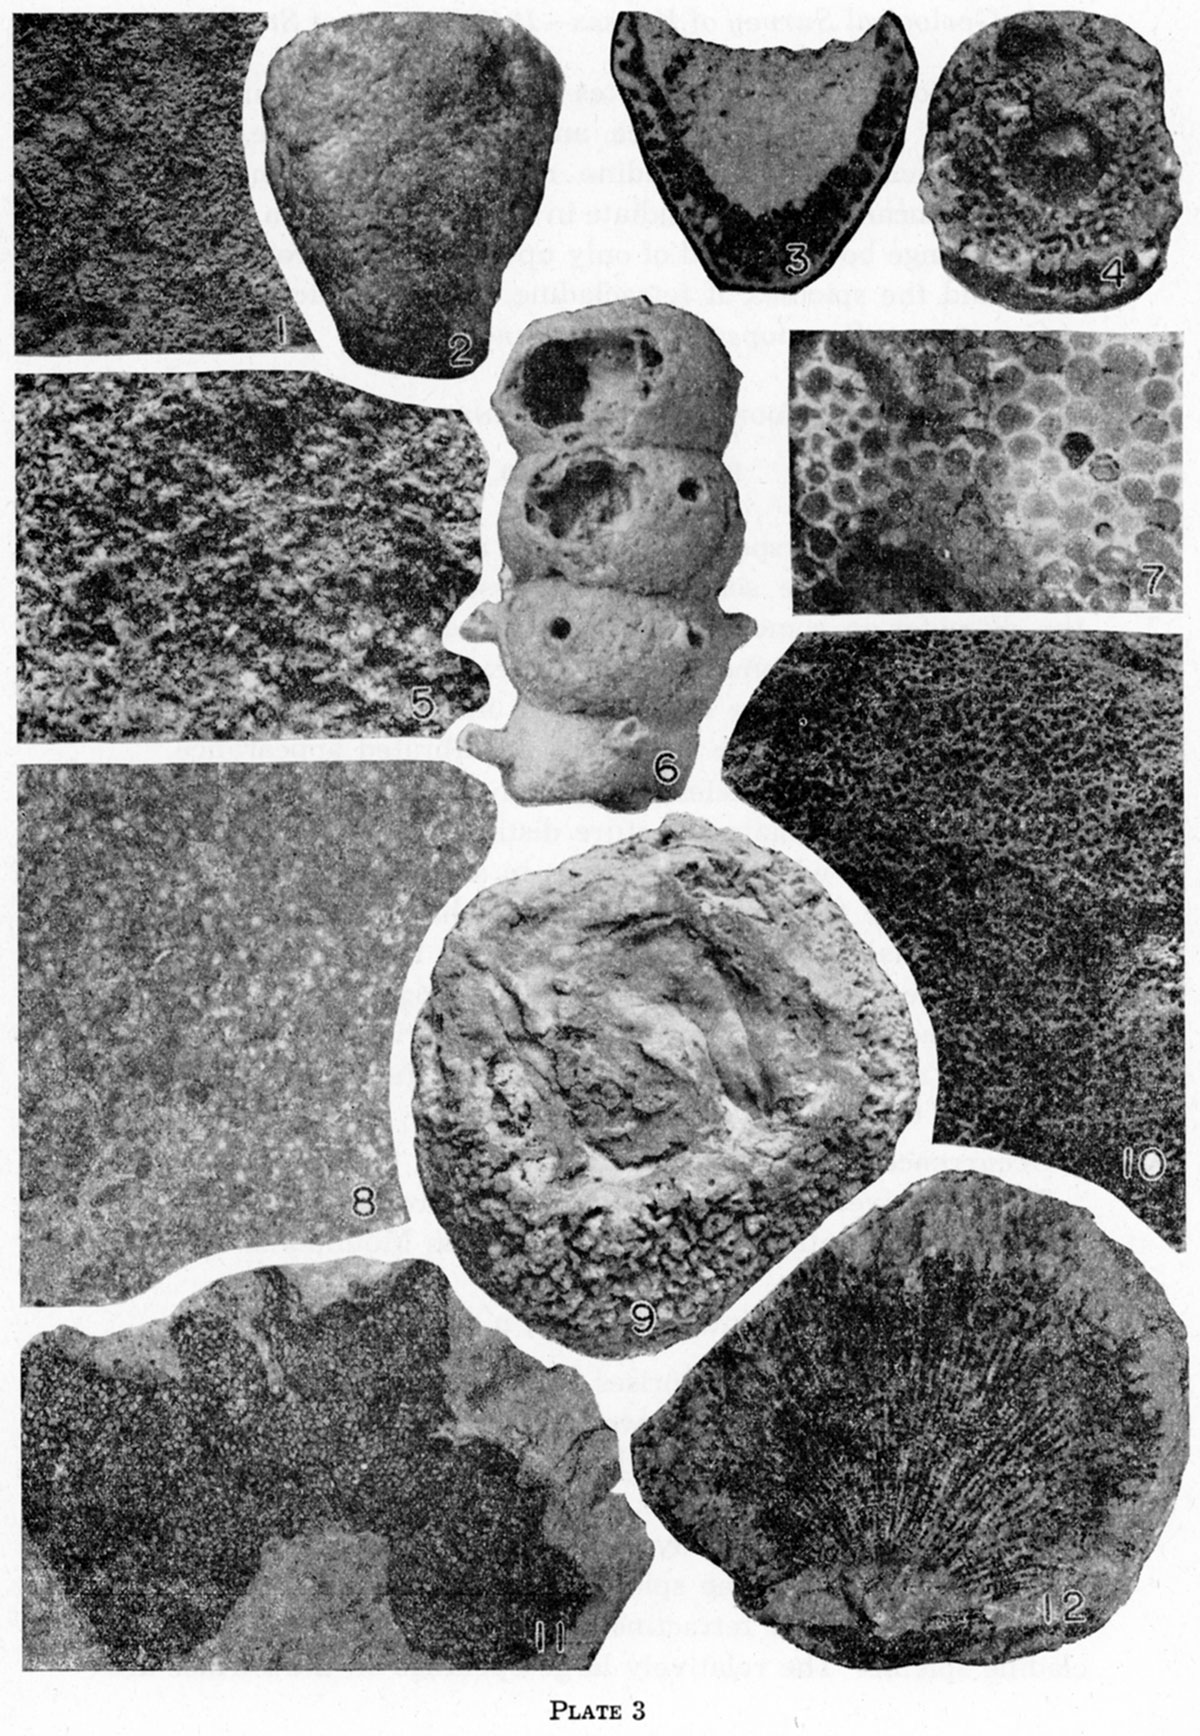 Black and white photos of fossils, Plate 3.